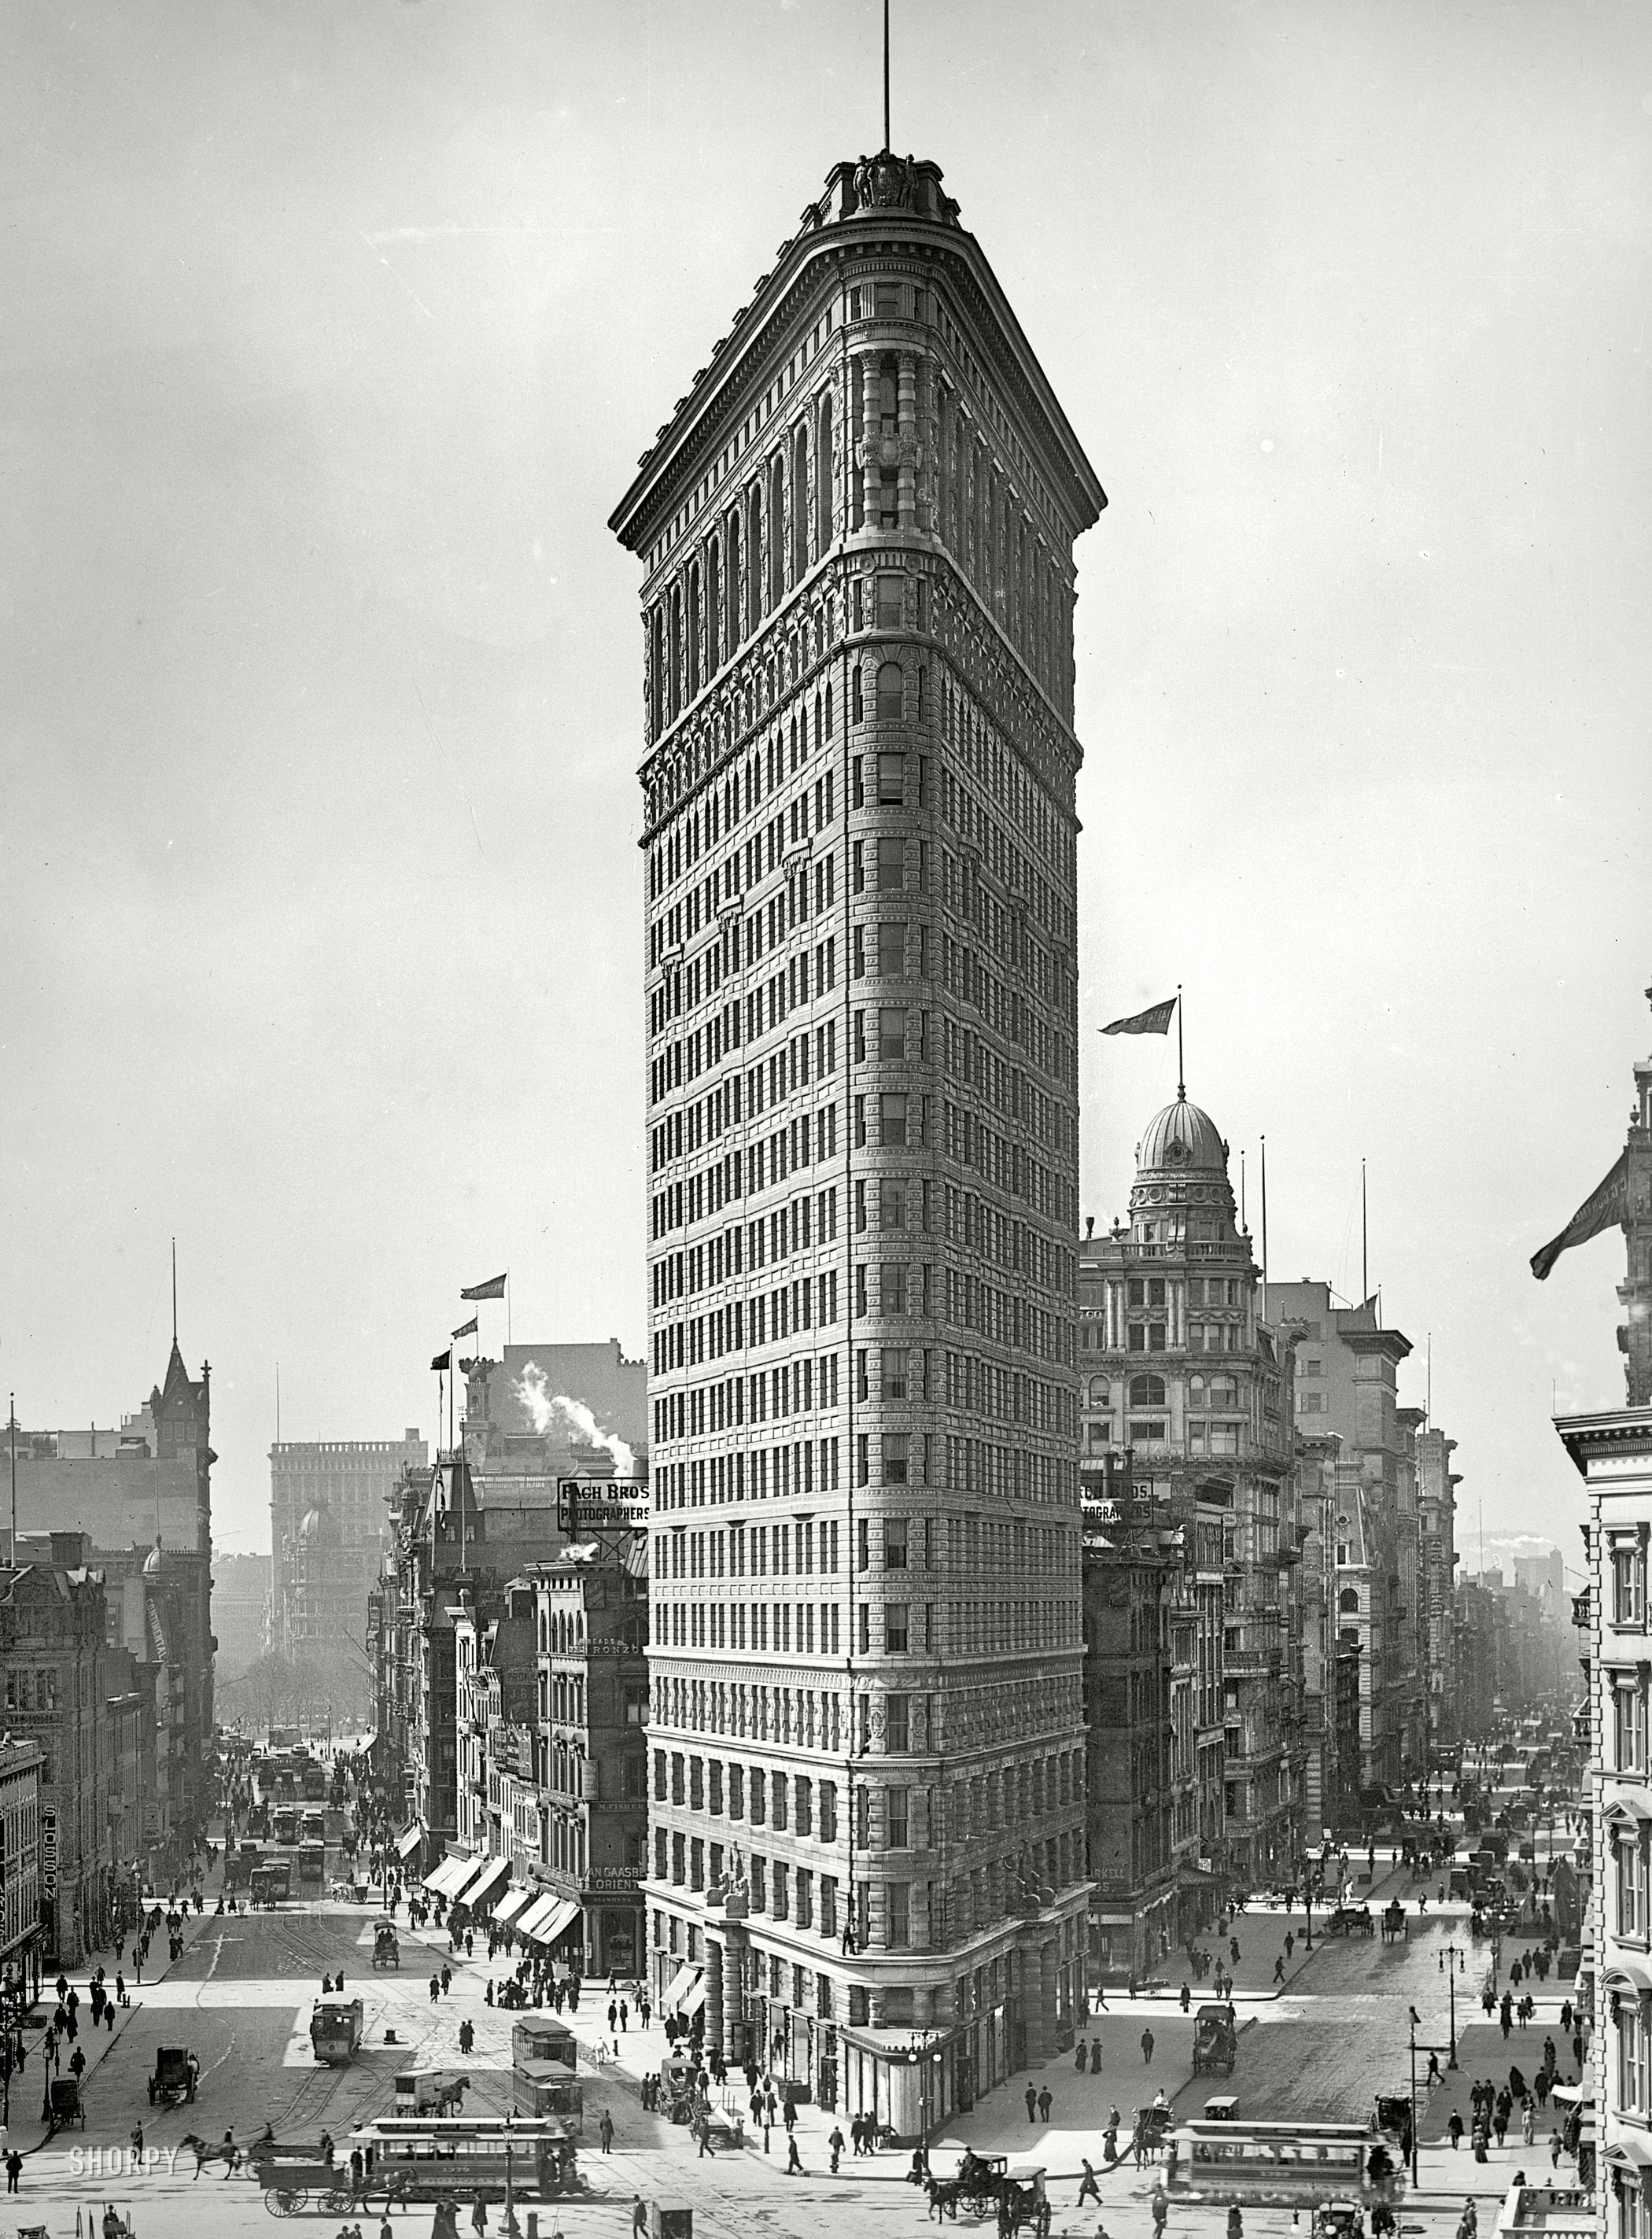 The Flatiron Building circa 1903, with Broadway on the left and Fifth Avenue on the right, and lots of street traffic all around this early skyscraper shortly after its completion. 8x10 inch glass negative, Detroit Publishing Co. View full size.